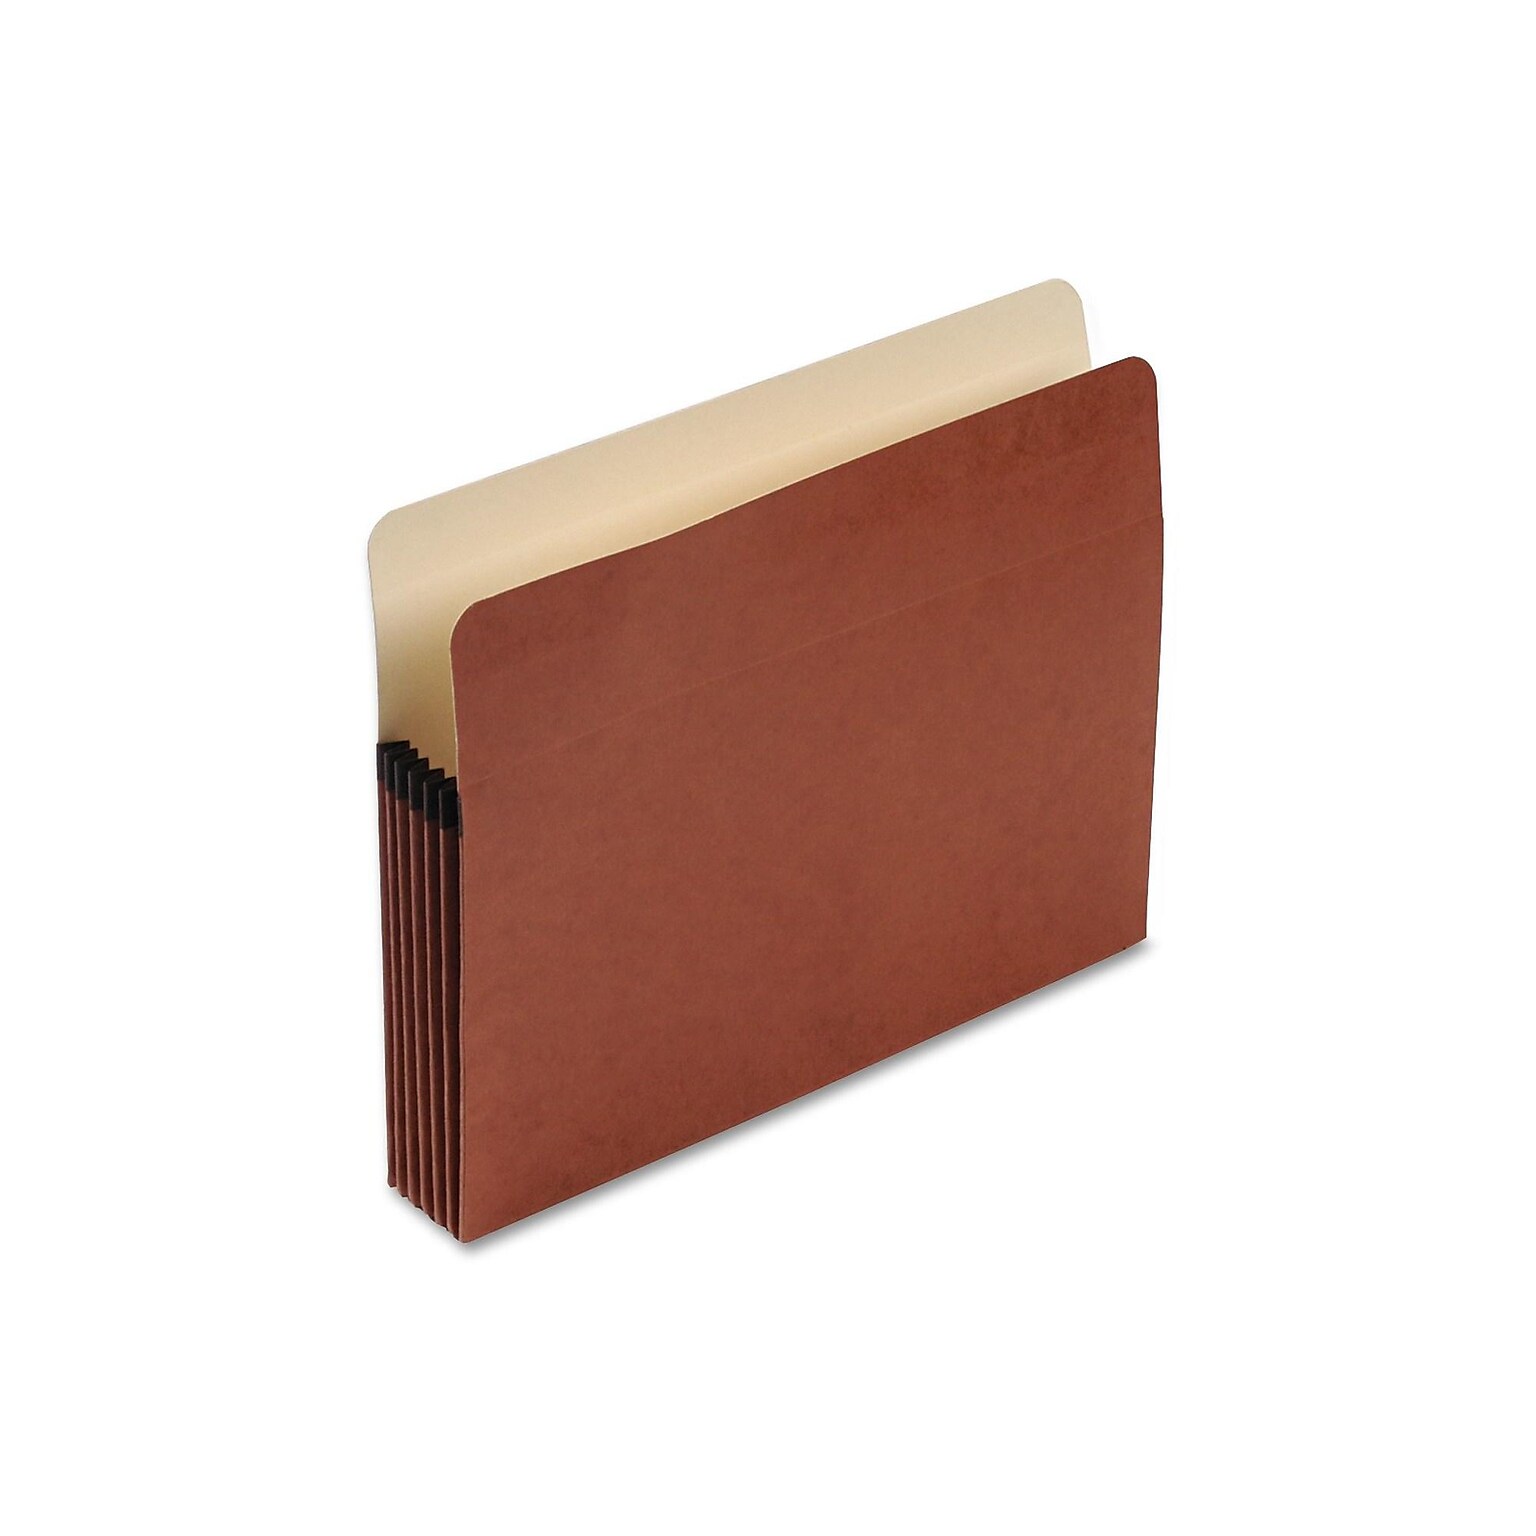 Pendaflex 30% Recycled Reinforced File Pocket, 5 1/4 Expansion, Letter Size, Brown, 50/Carton (S34G)